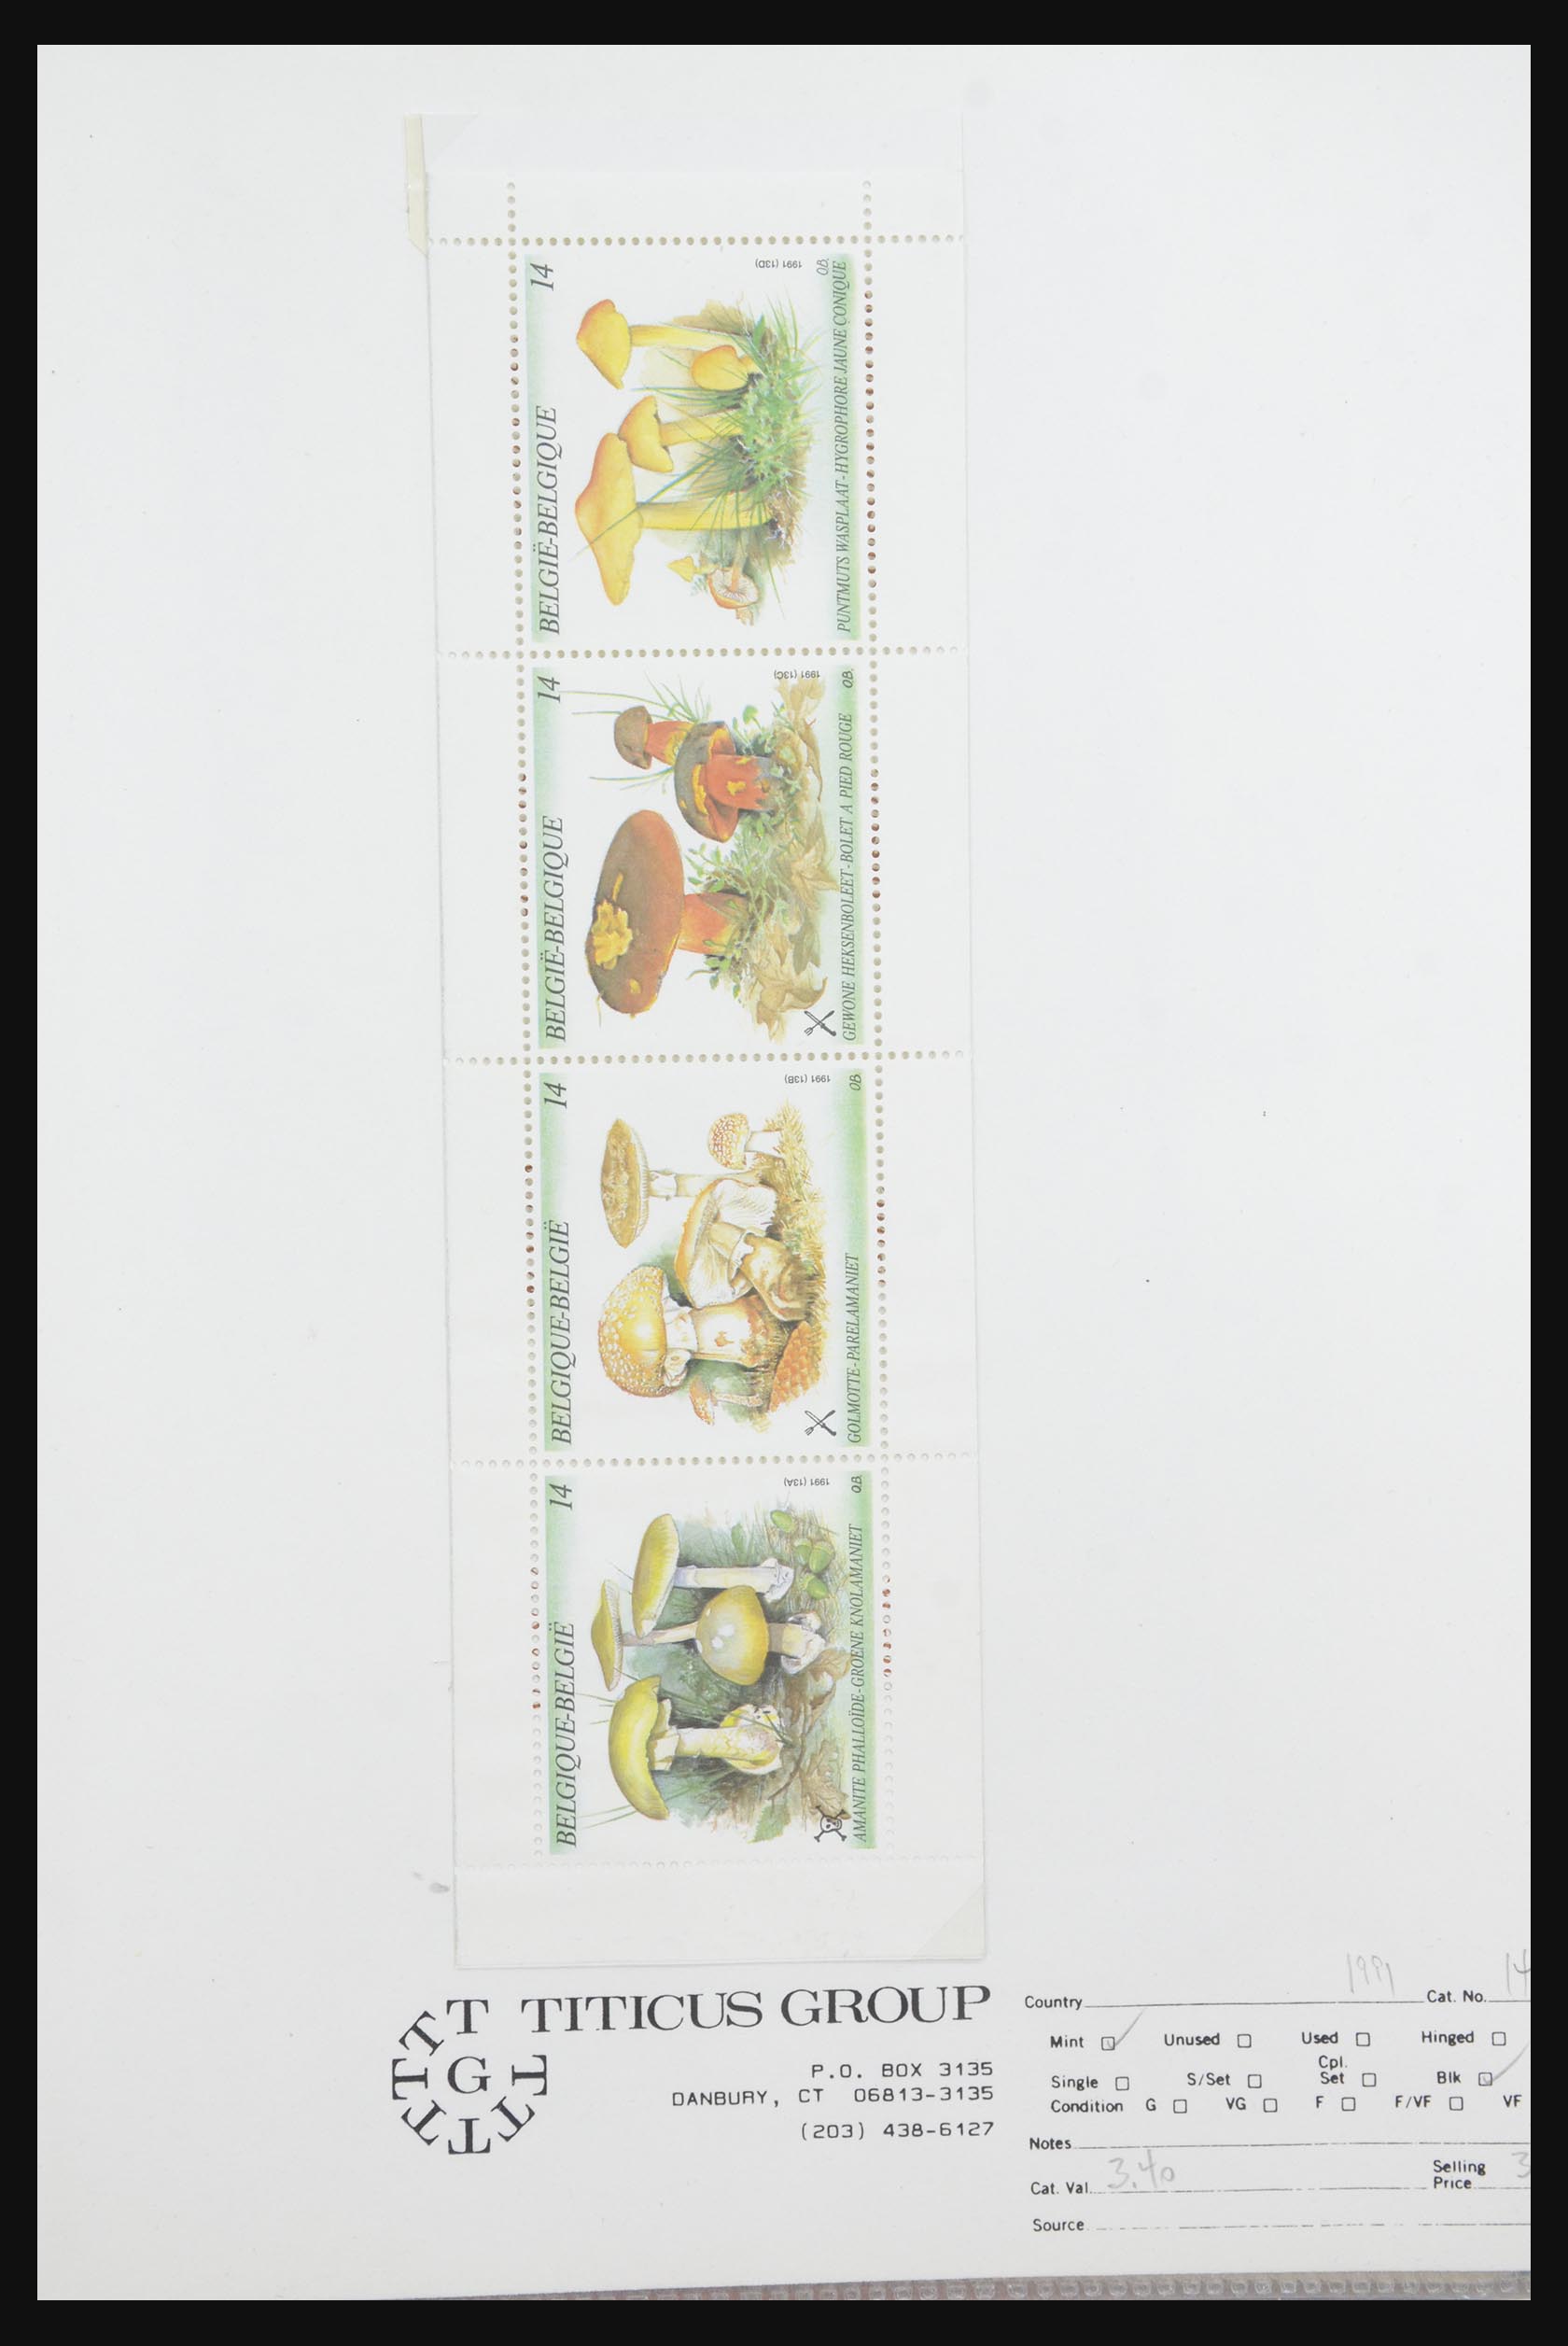 31915 087 - 31915 Western Europe souvenir sheets and stamp booklets on FDC.